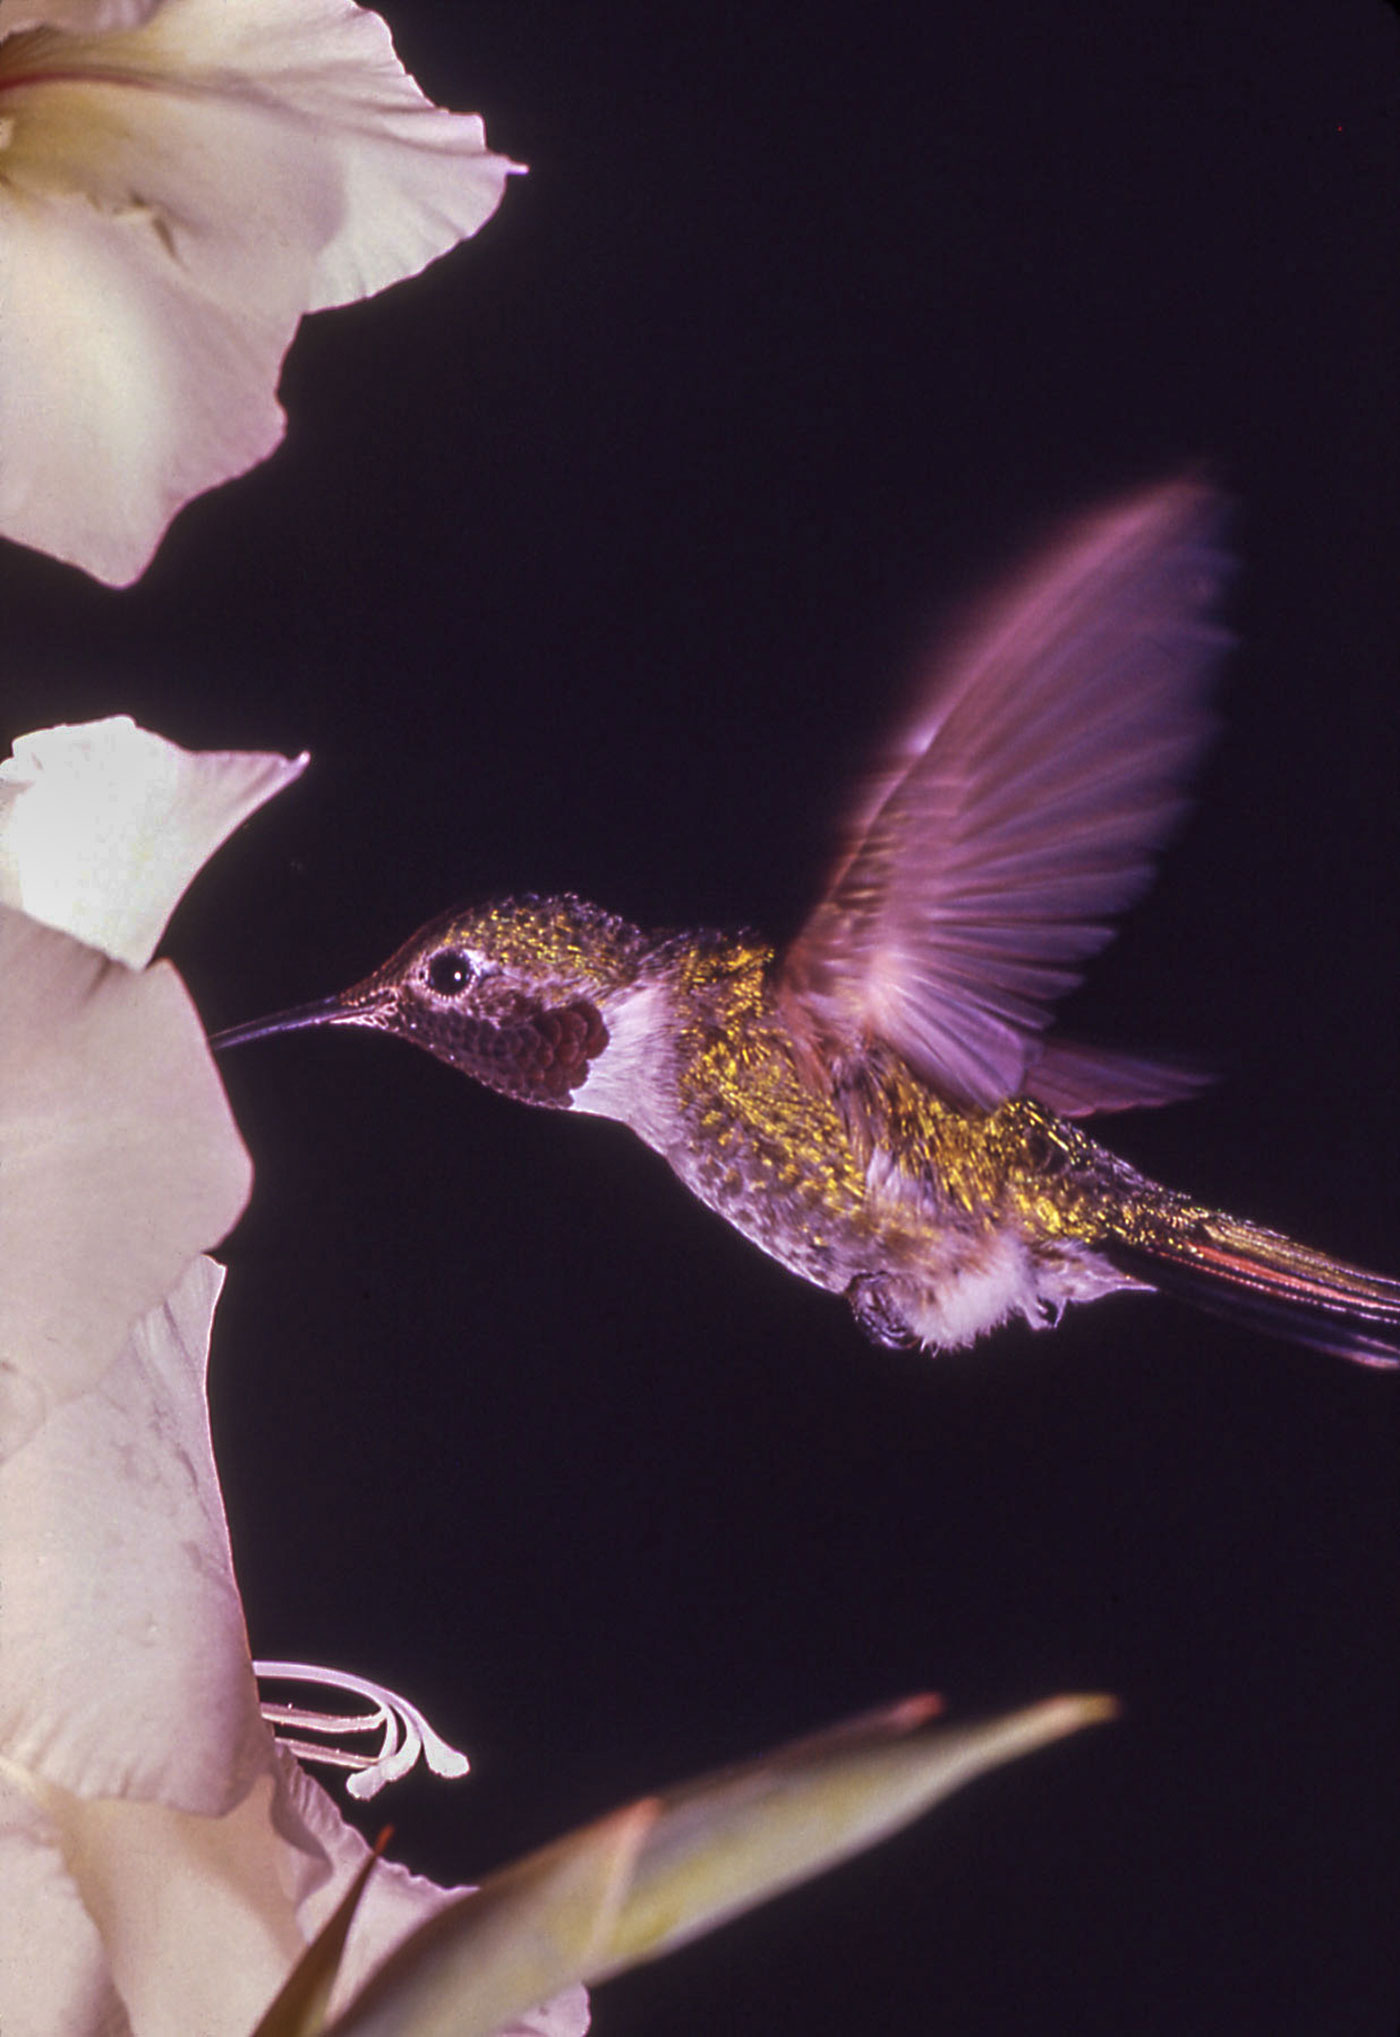 A hummingbird is feeding off of the nectar of a flower.